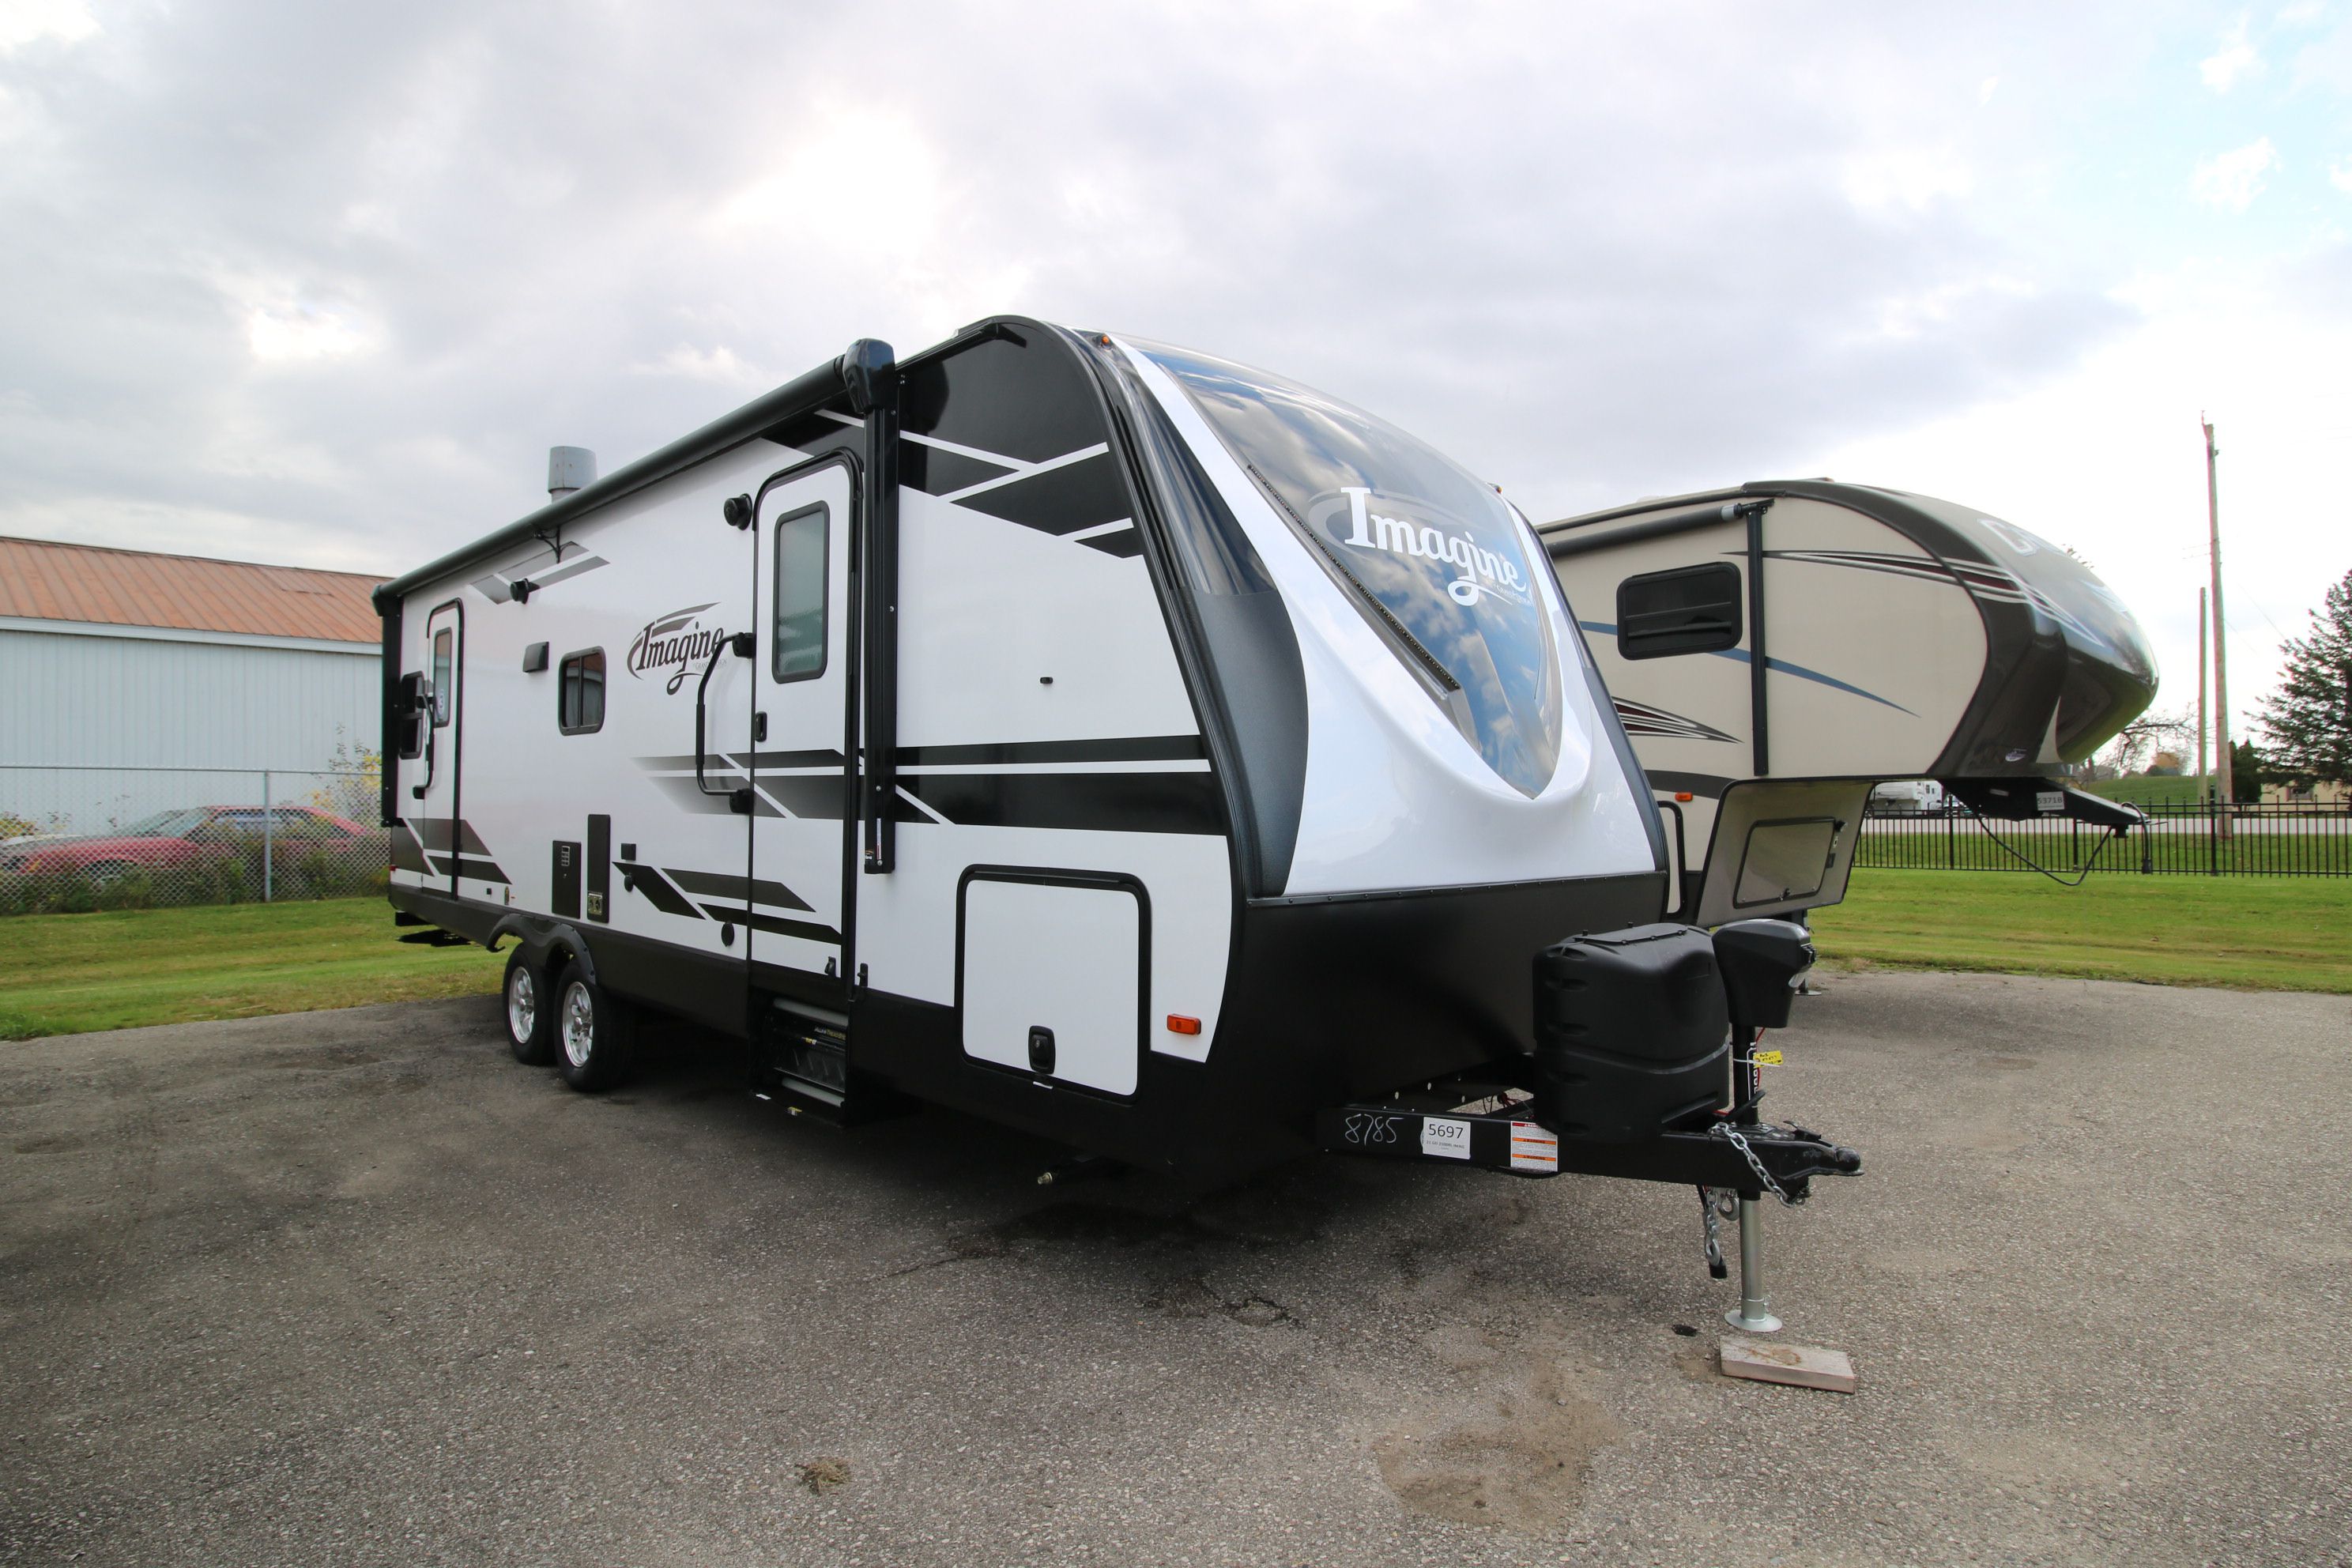 pre owned travel trailers